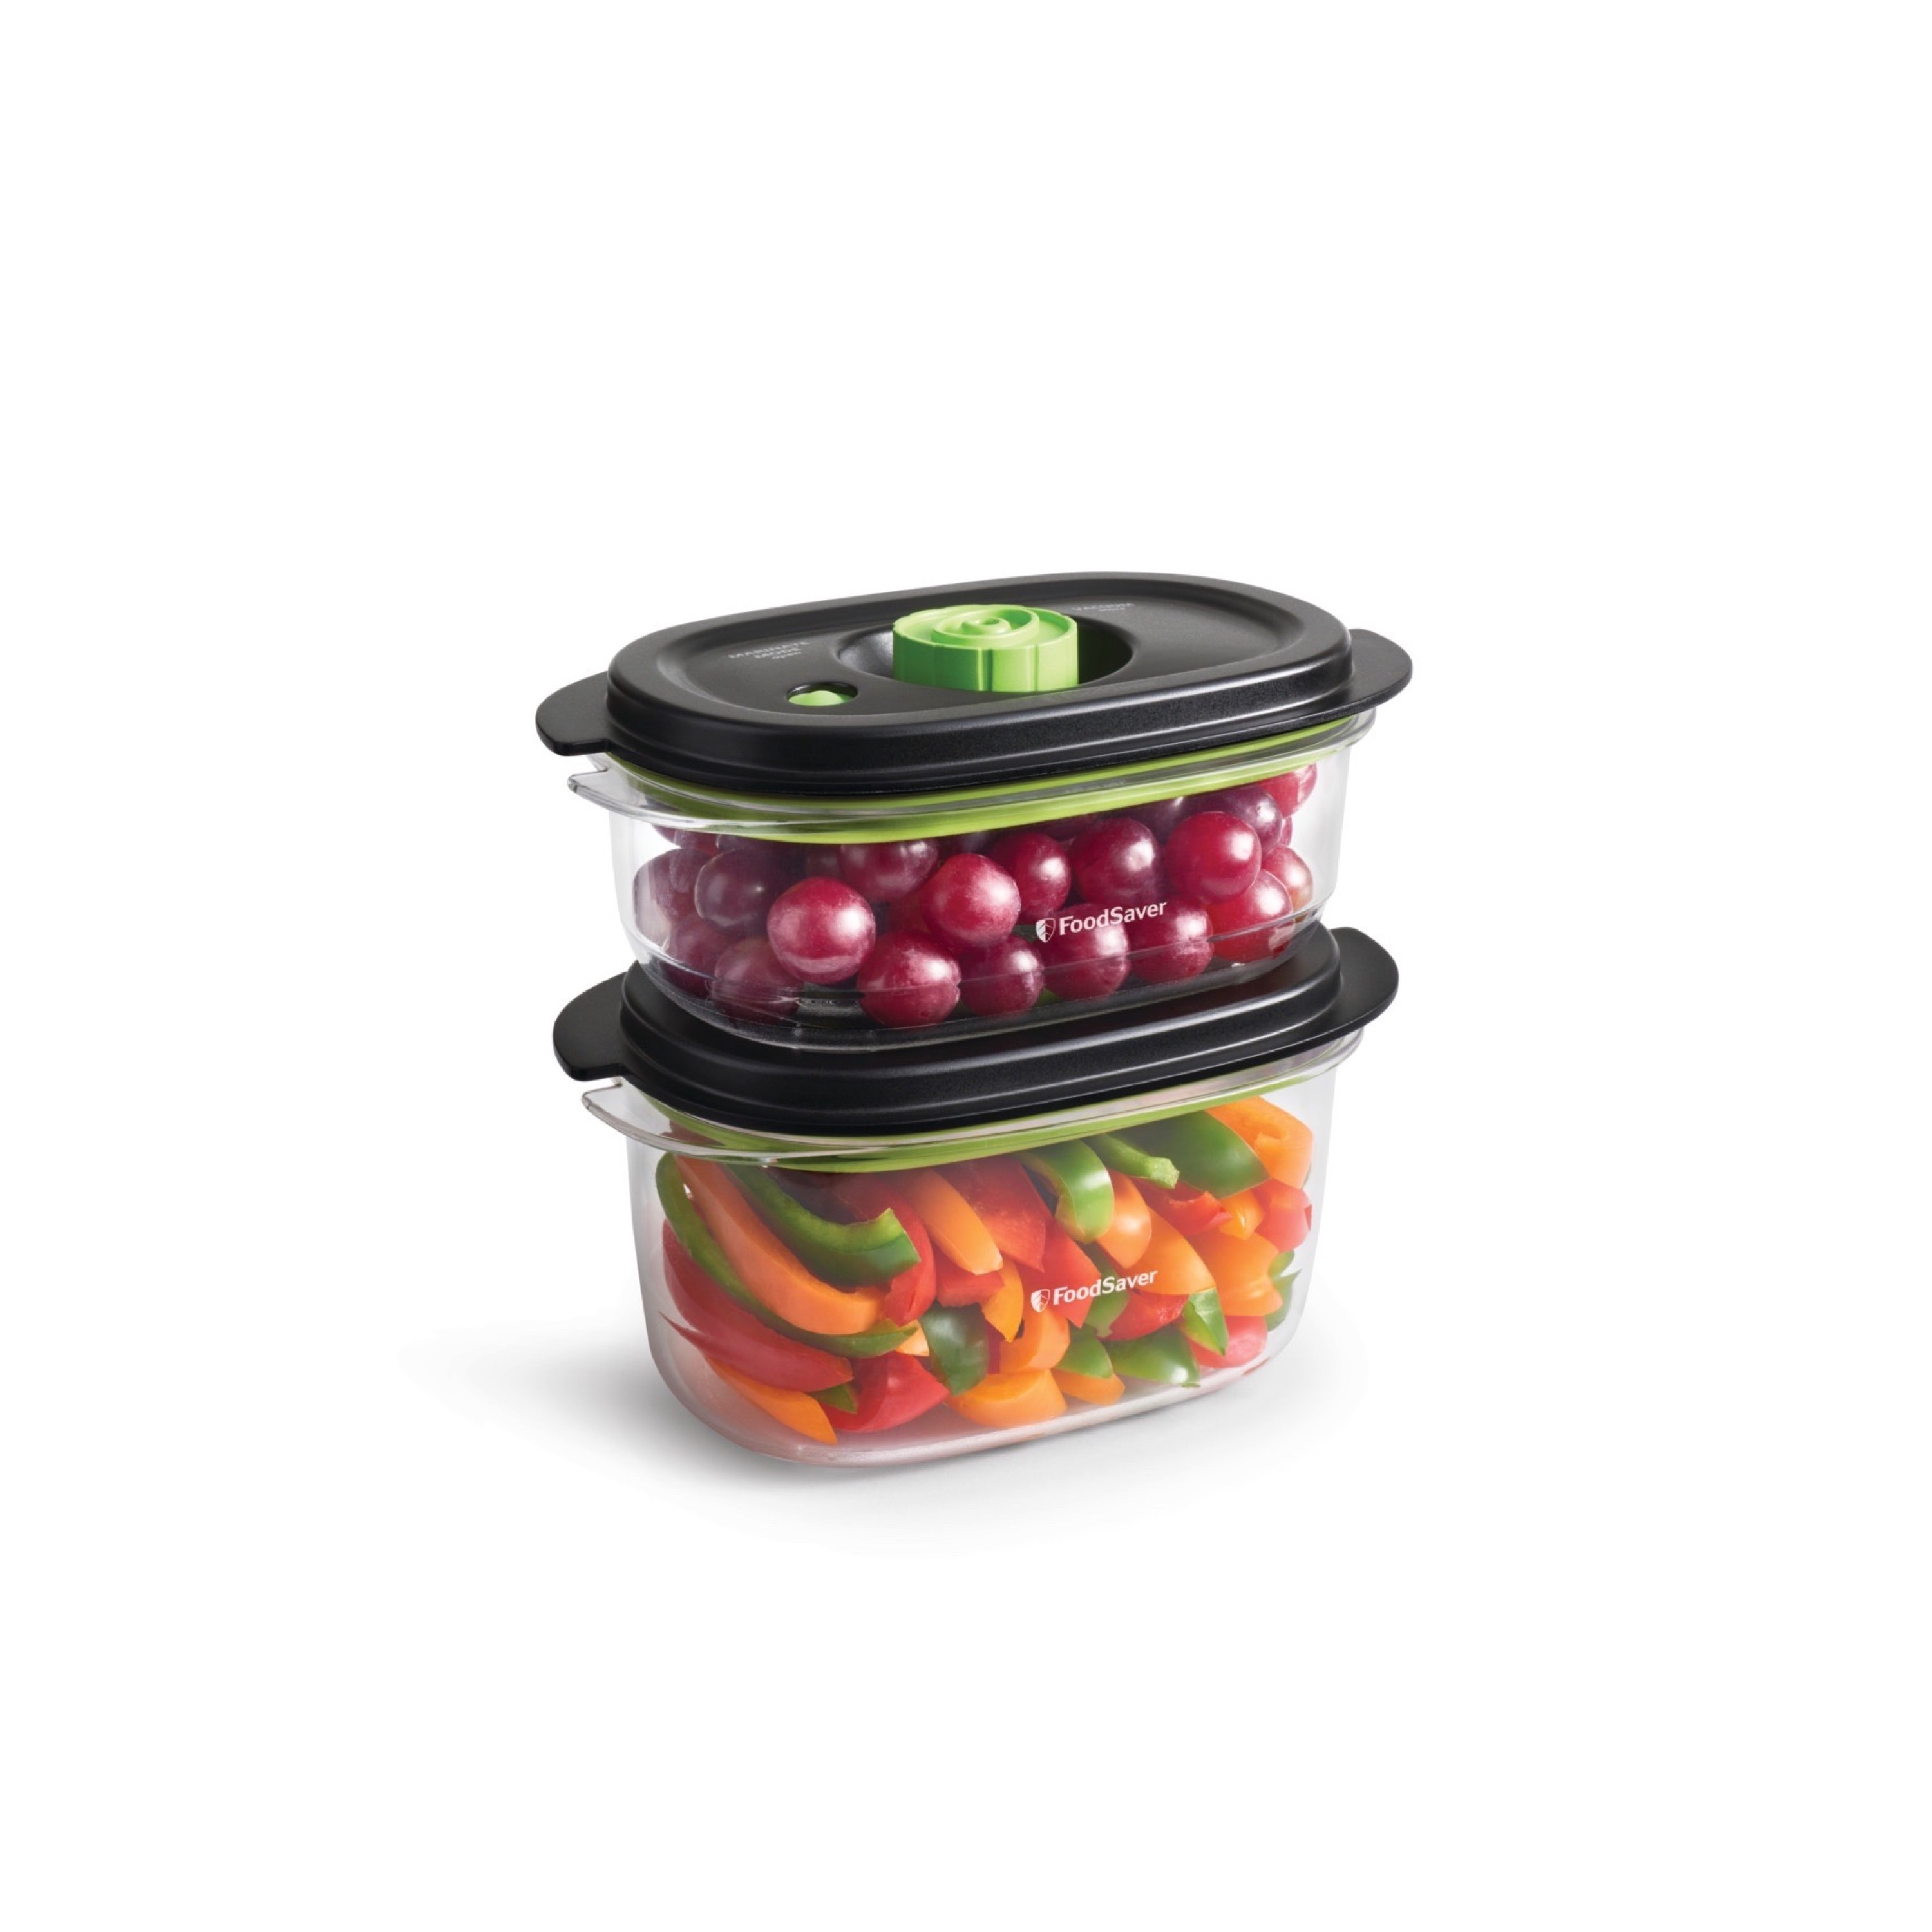 FoodSaver Preserve & Marinate Vacuum Containers, 3-Cup & 5-Cup Set - image 1 of 11